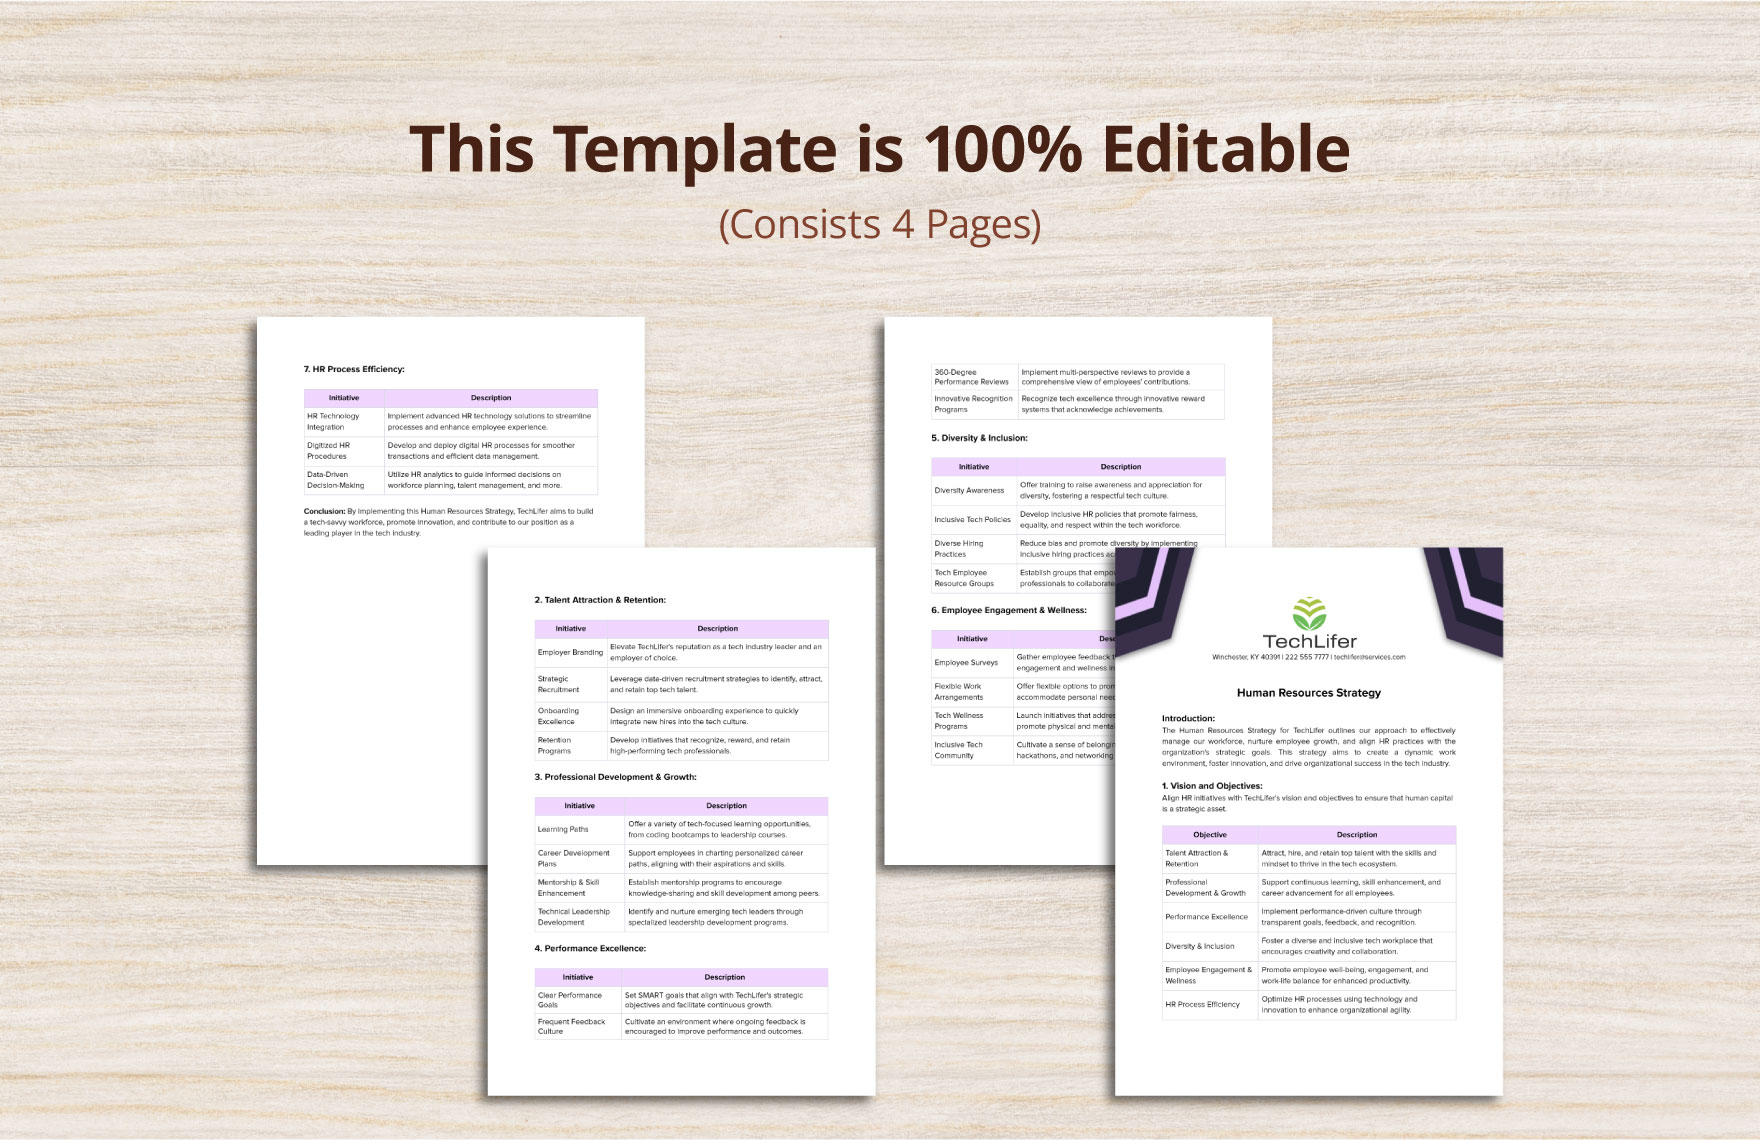 Human Resources Strategy Template